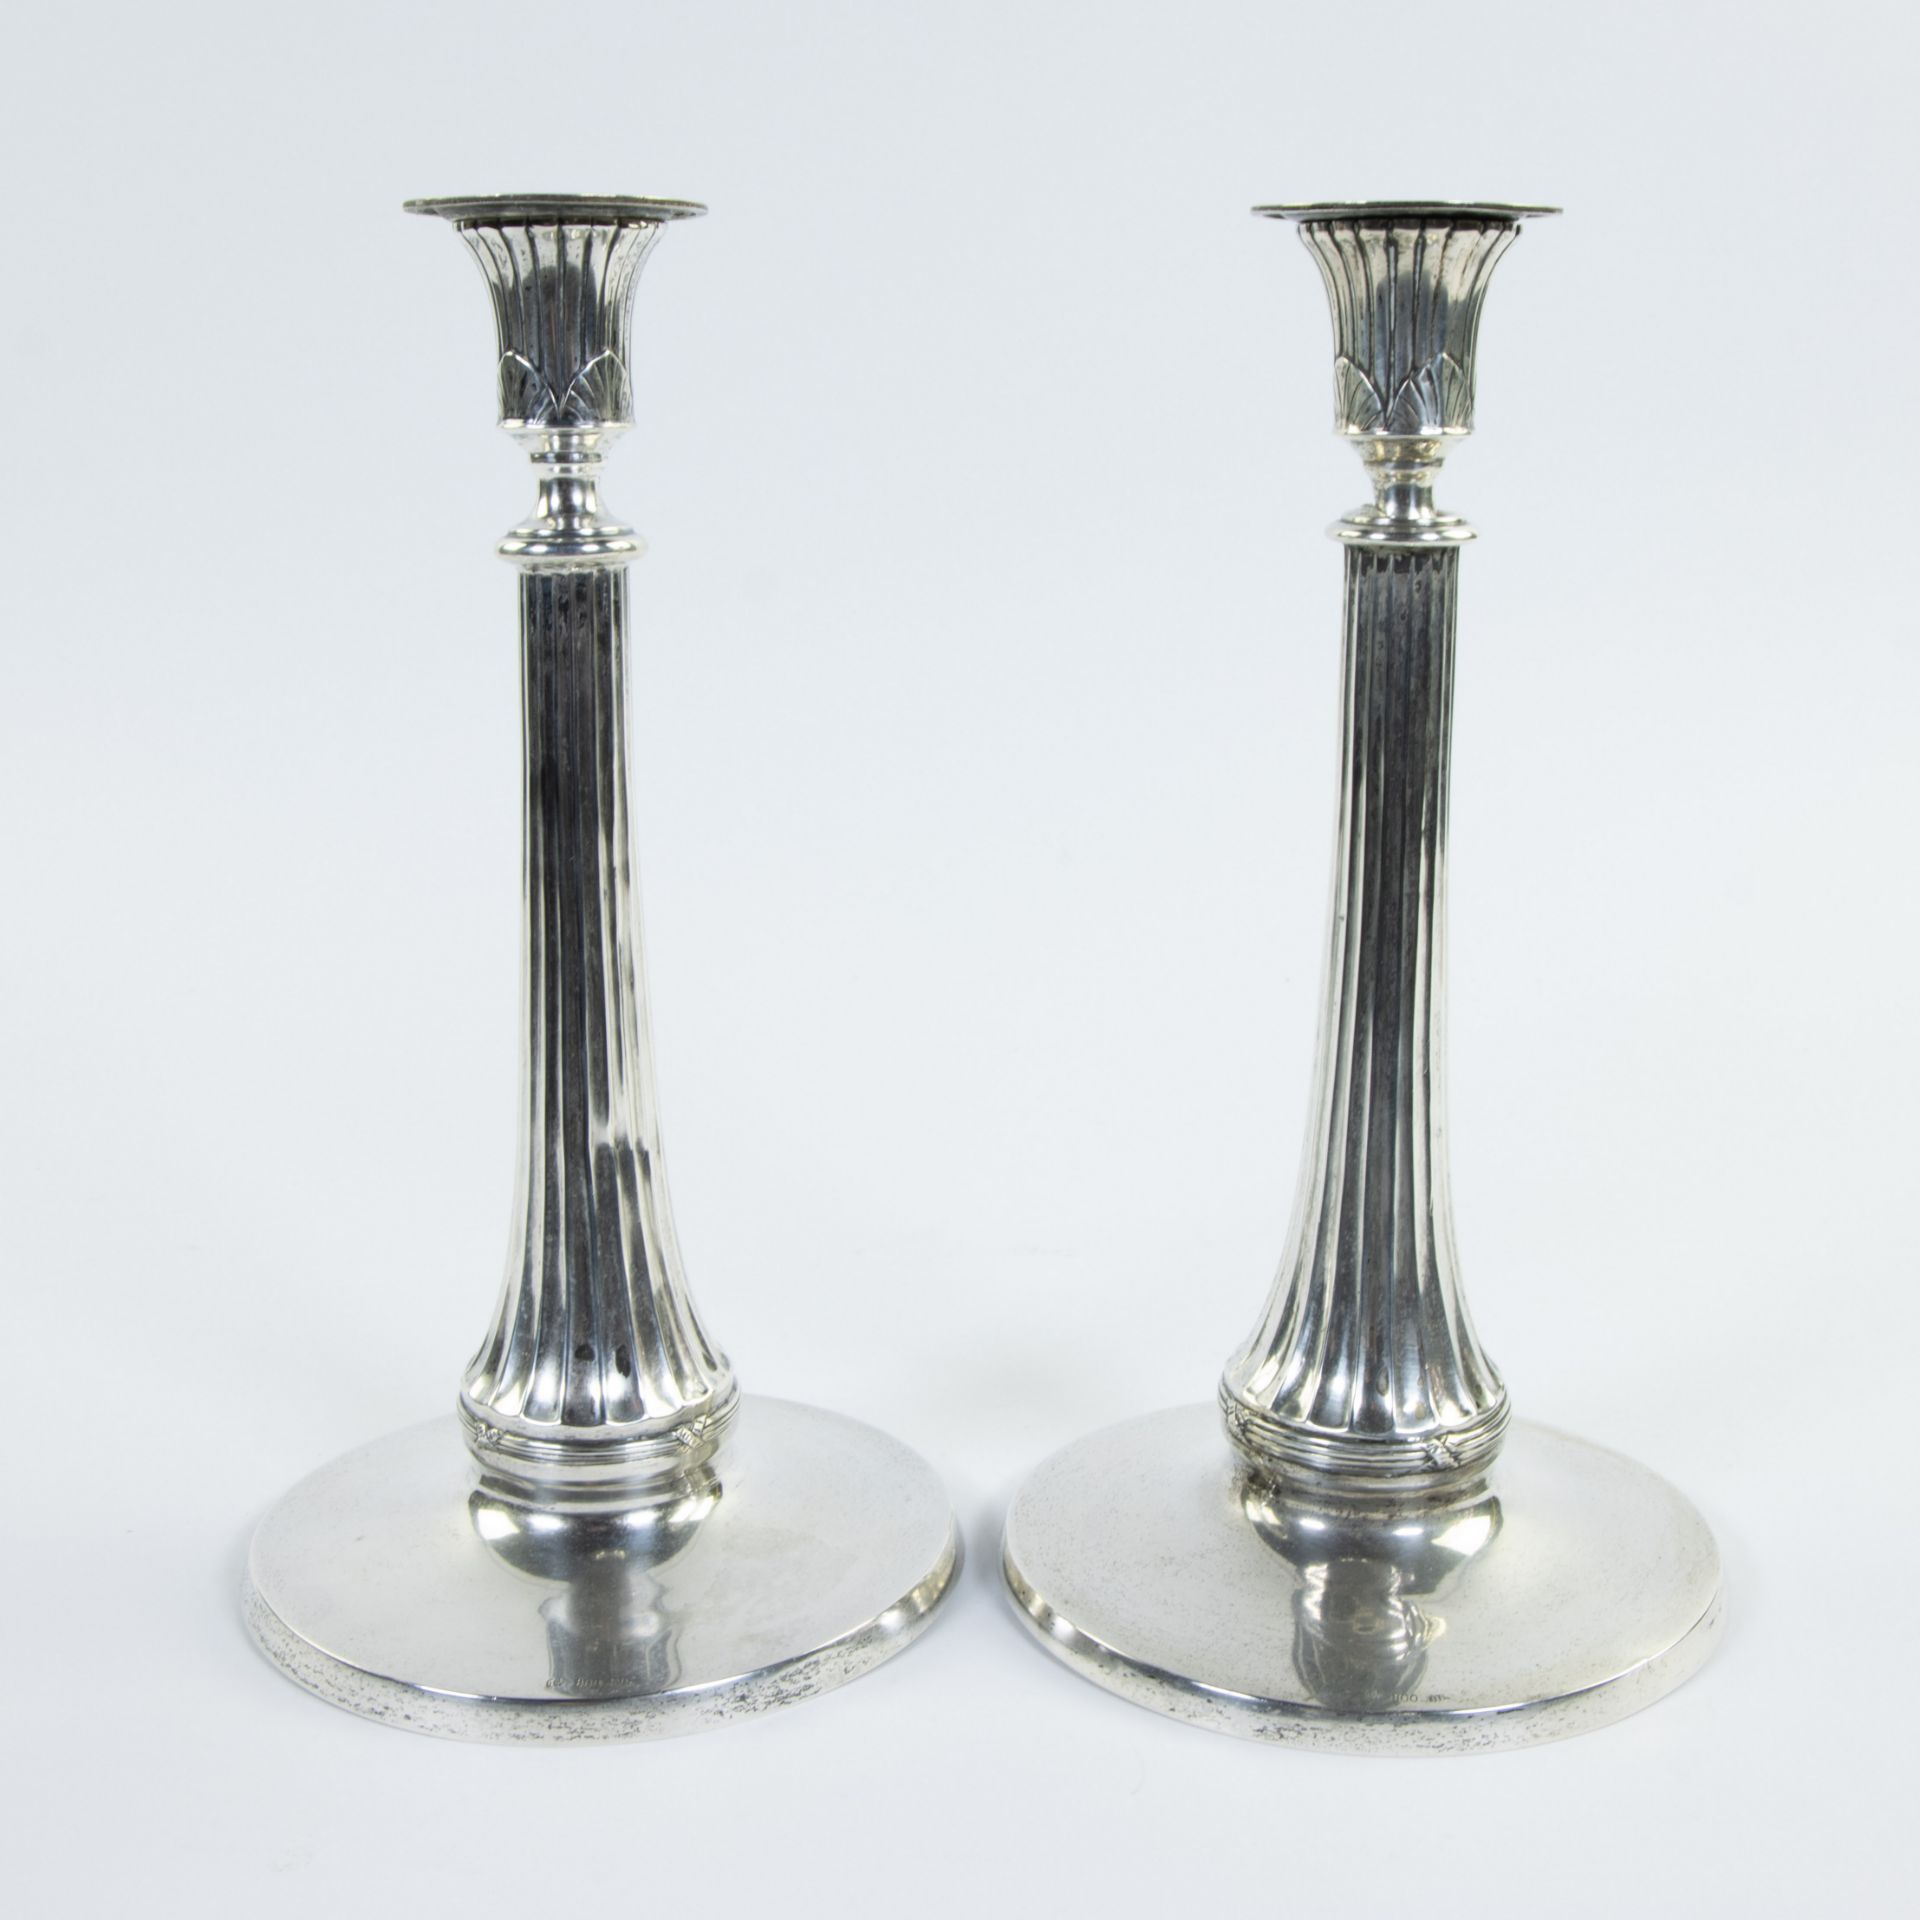 Pair of silver candlesticks, round model with contoured column with fluting, marked 800 - Image 3 of 6